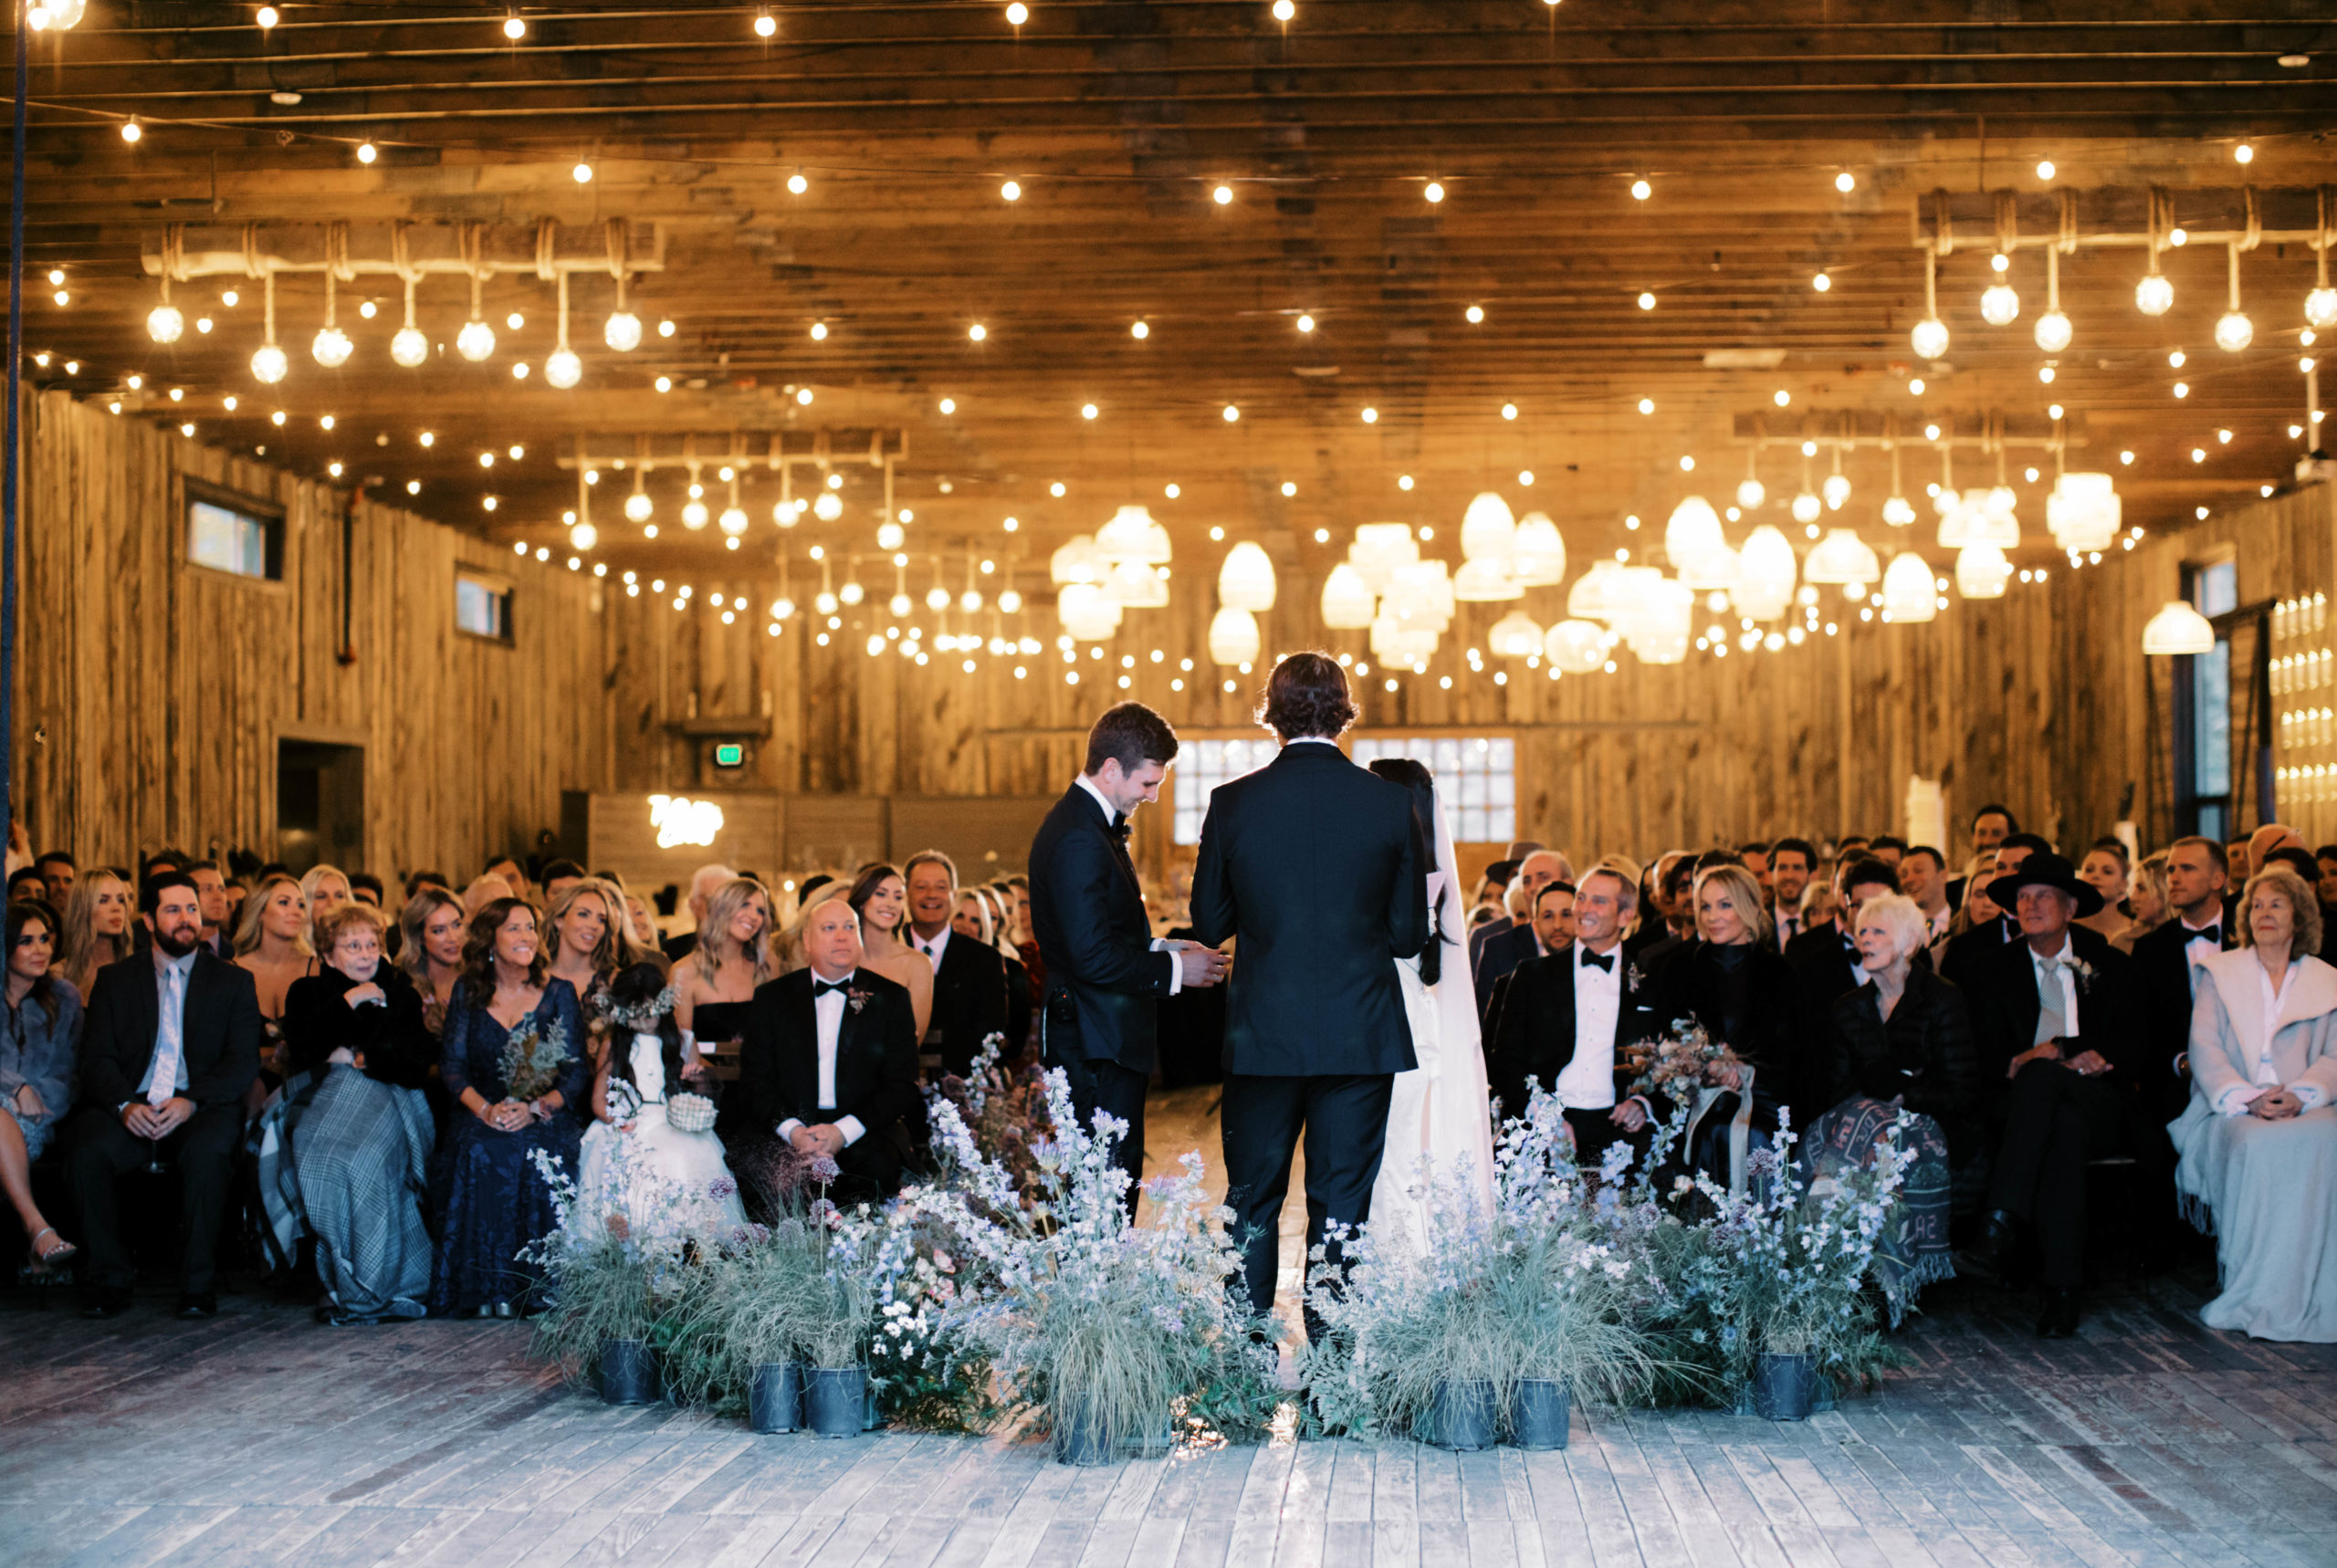 a couple exchanges vows while their friends and family look on at an elegant ranch wedding in park city utah at the lodge at blue sky. photo by megan robinson photography 